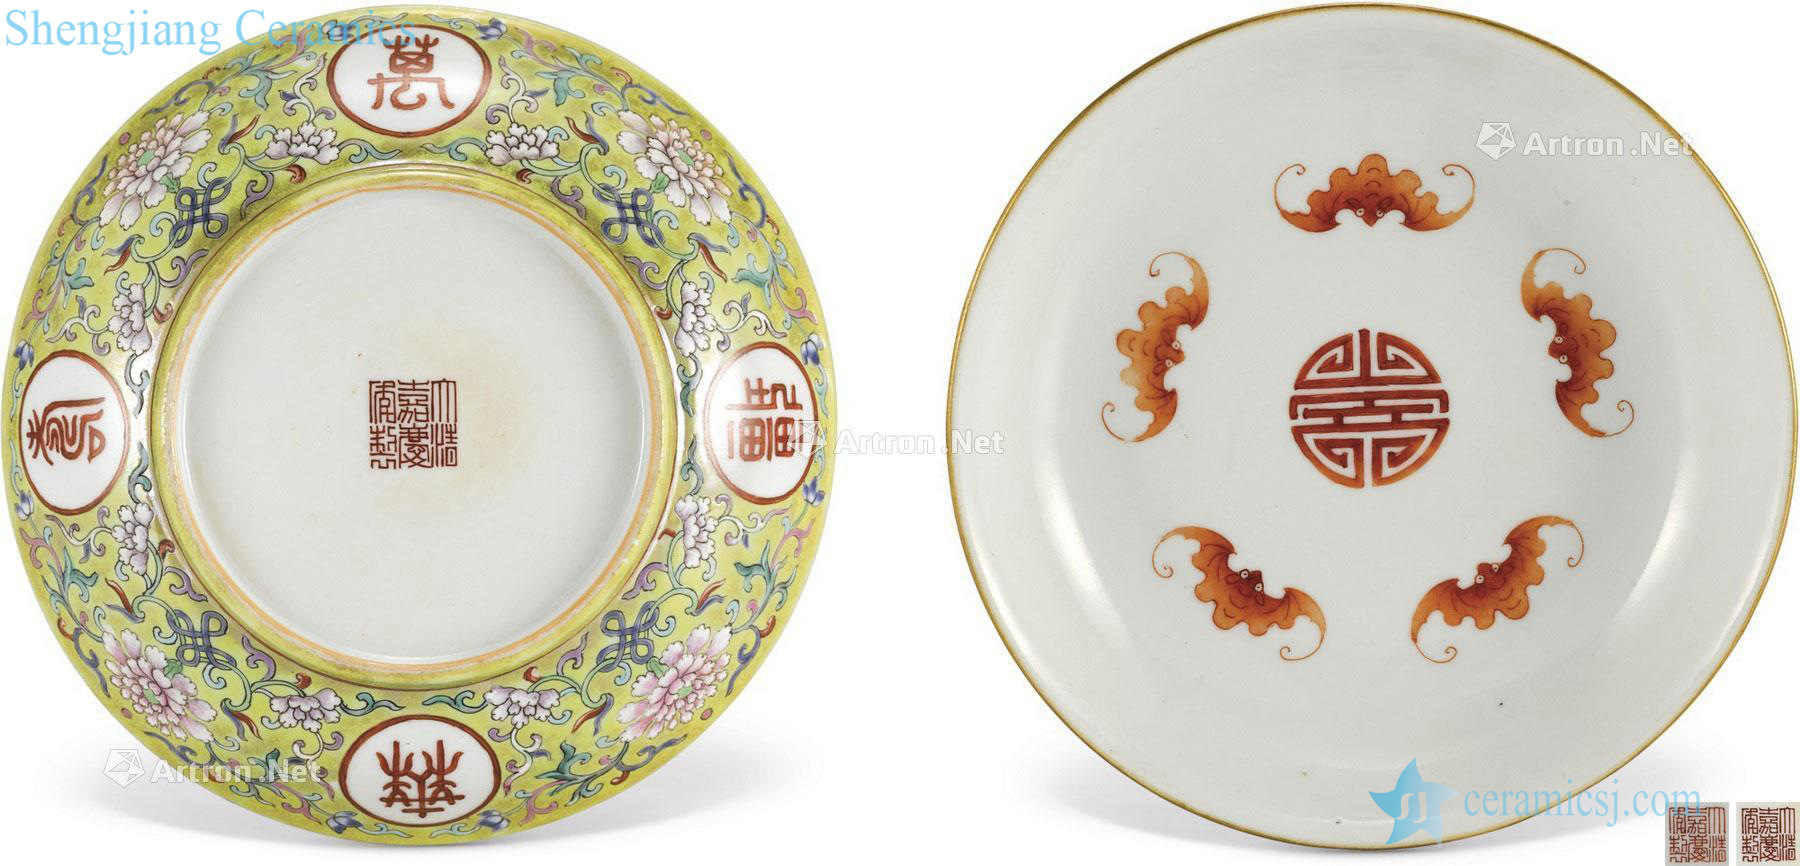 Qing jiaqing pastel stays in plate (a pair)